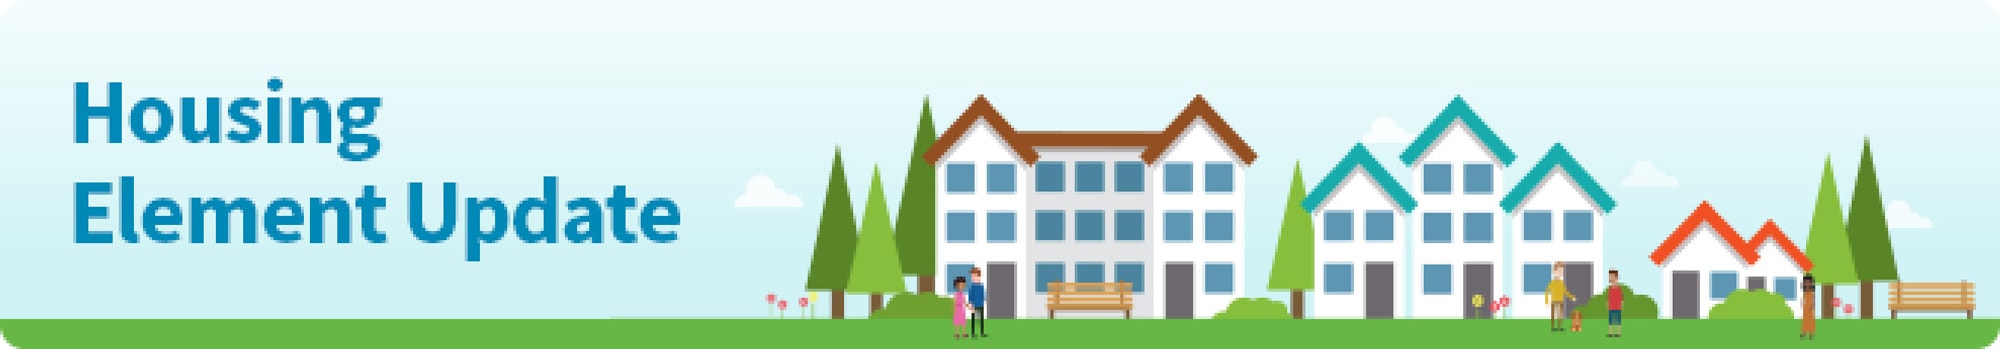 Image header showing different styles of housing